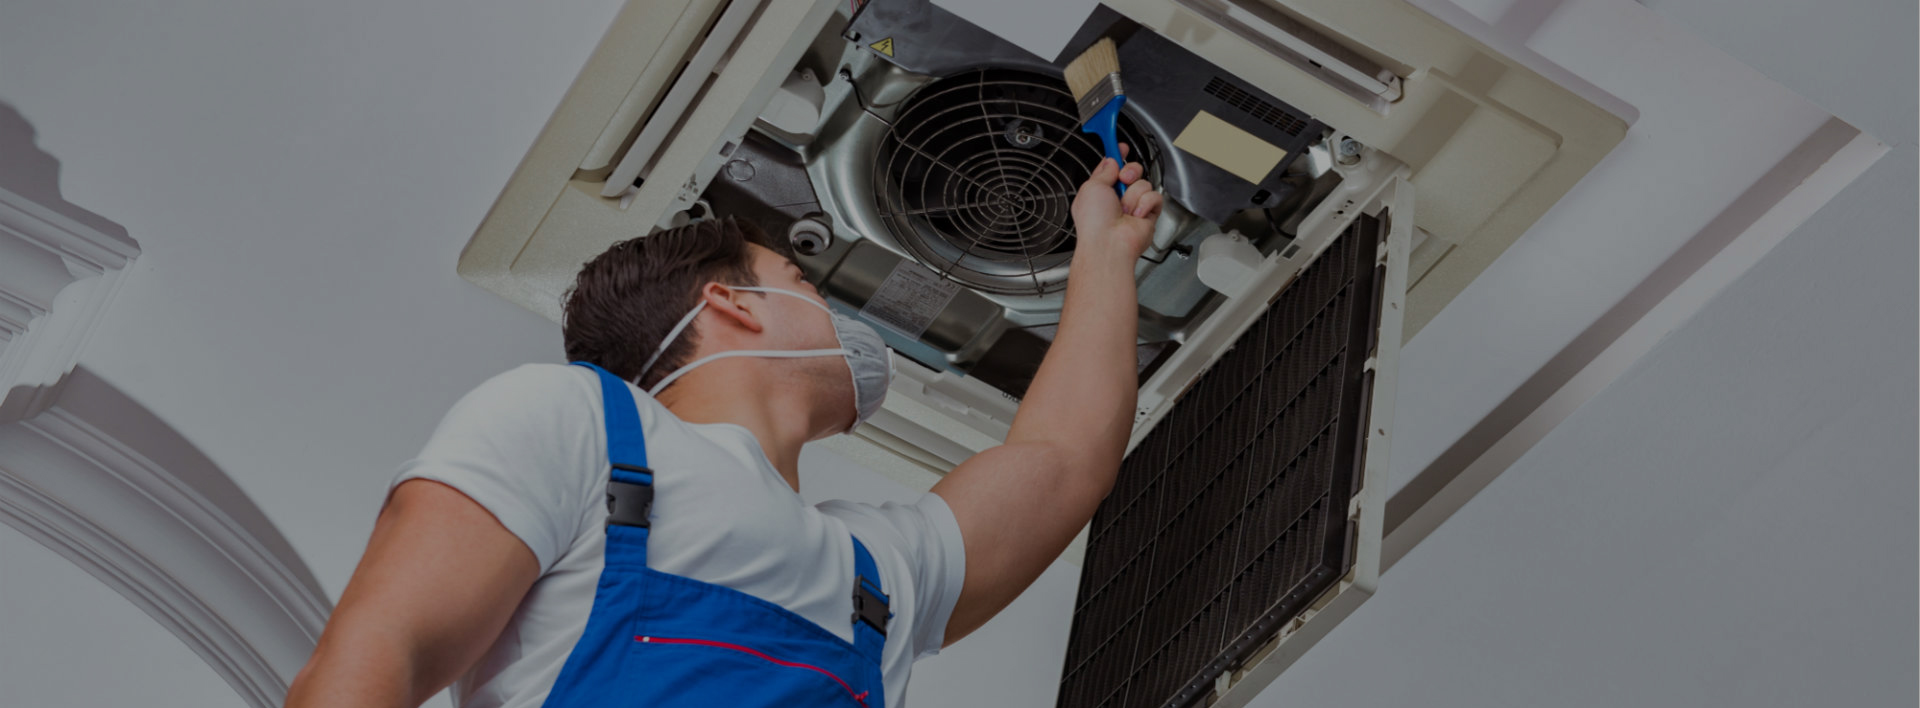 Air Conditioner Service | Danger of Mould in Air Conditioning